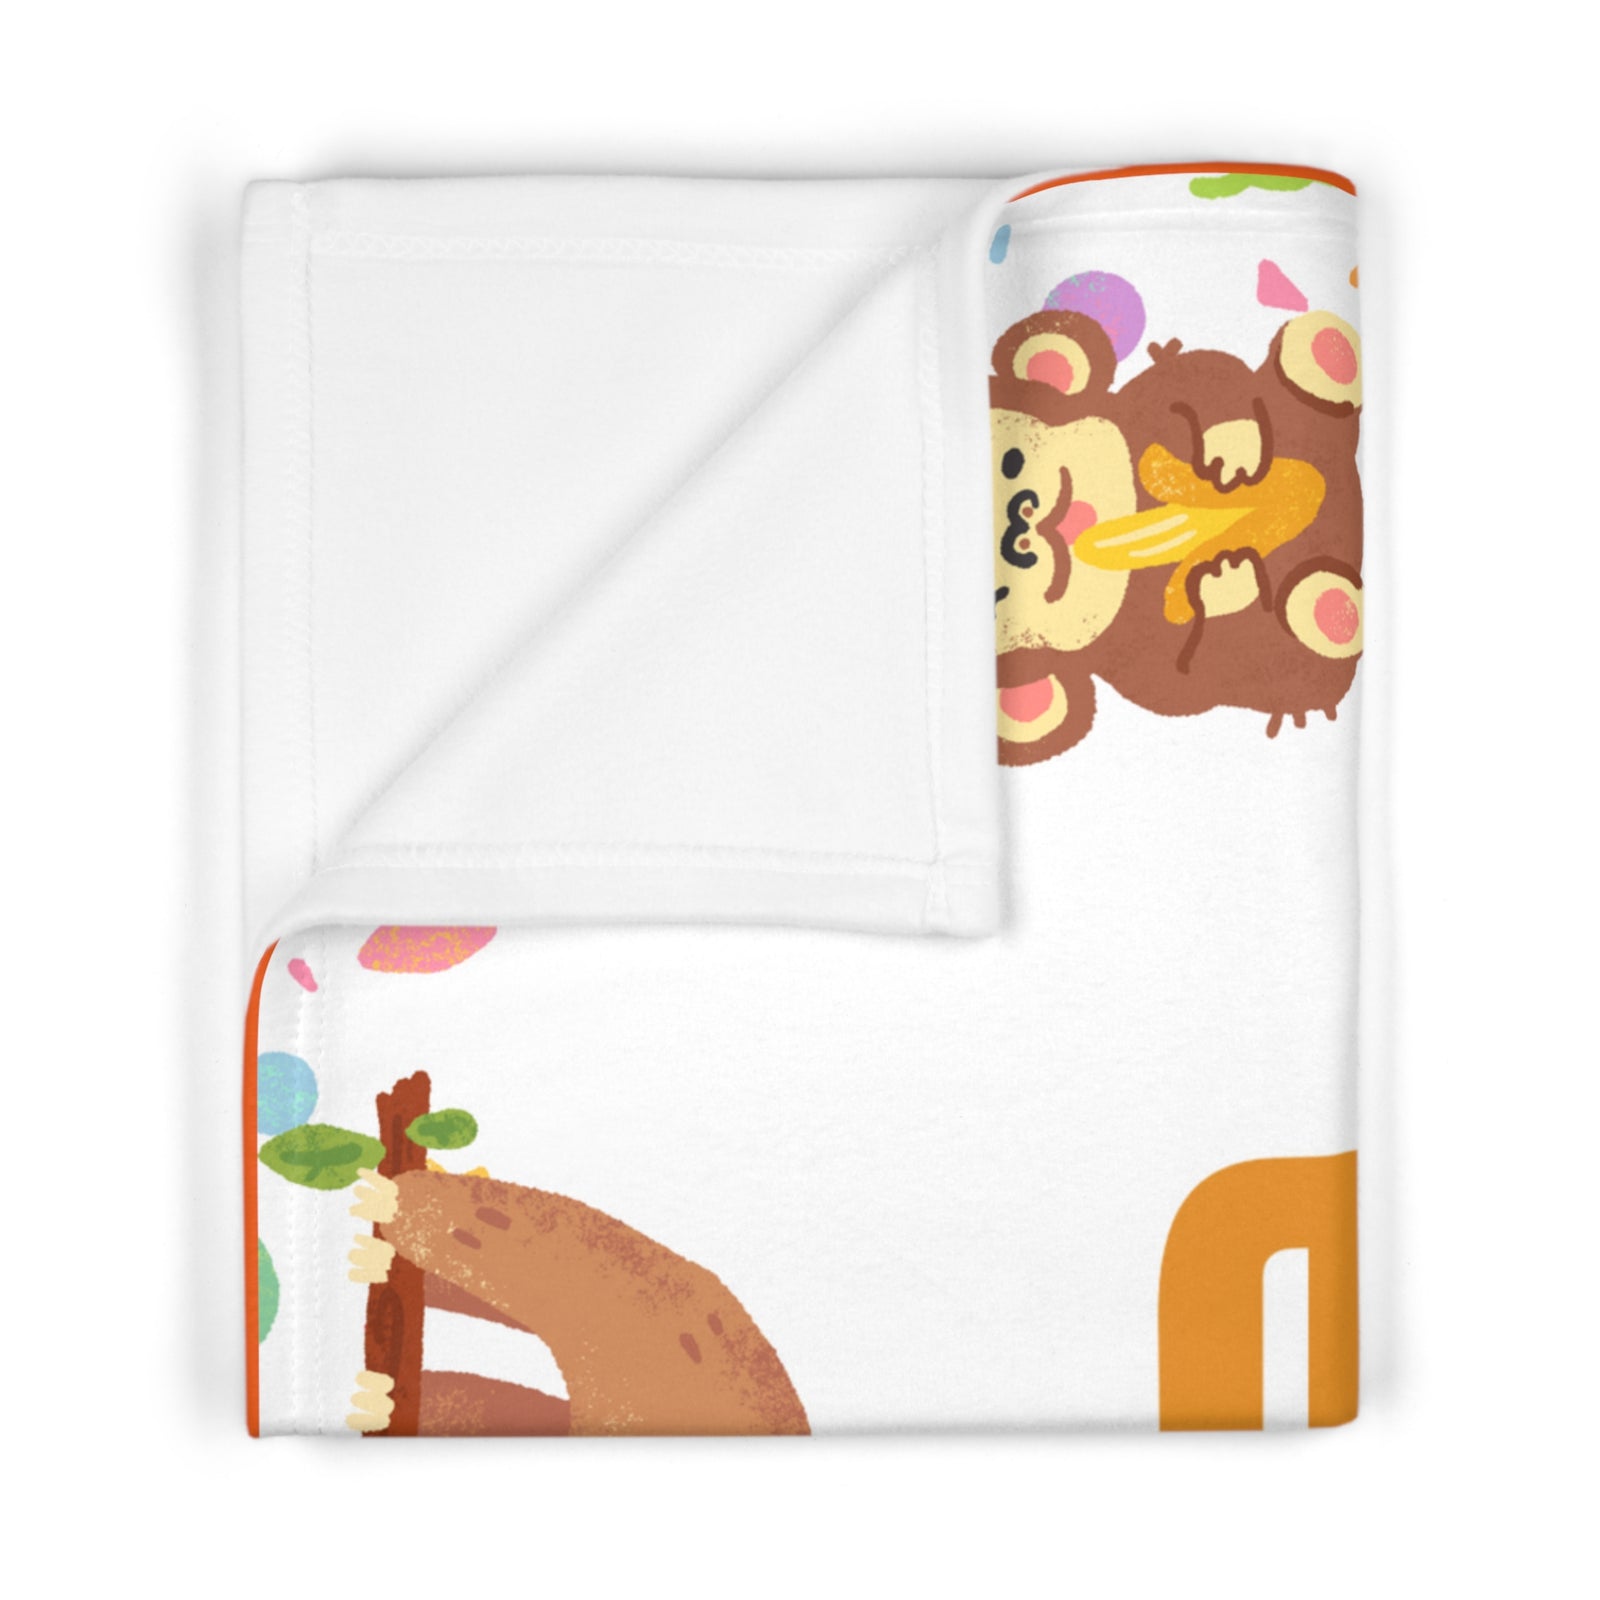 Cozy Comfort: Soft Fleece Baby Blanket Featuring the Adorable TryKid Logo - Perfect for Snuggles and Sweet Moments